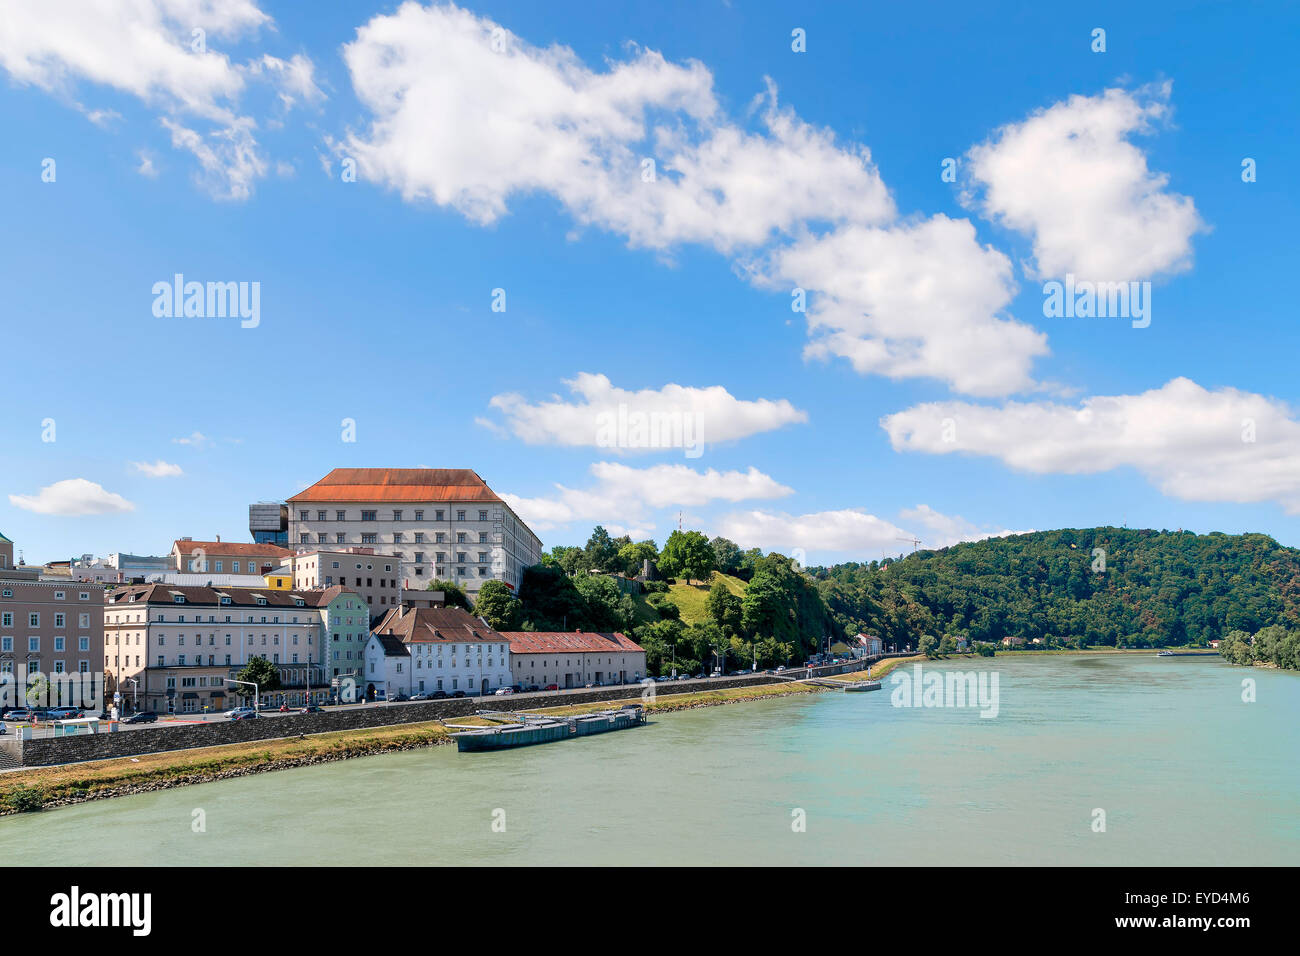 Image with view to the river Danube in Linz, Austria Stock Photo